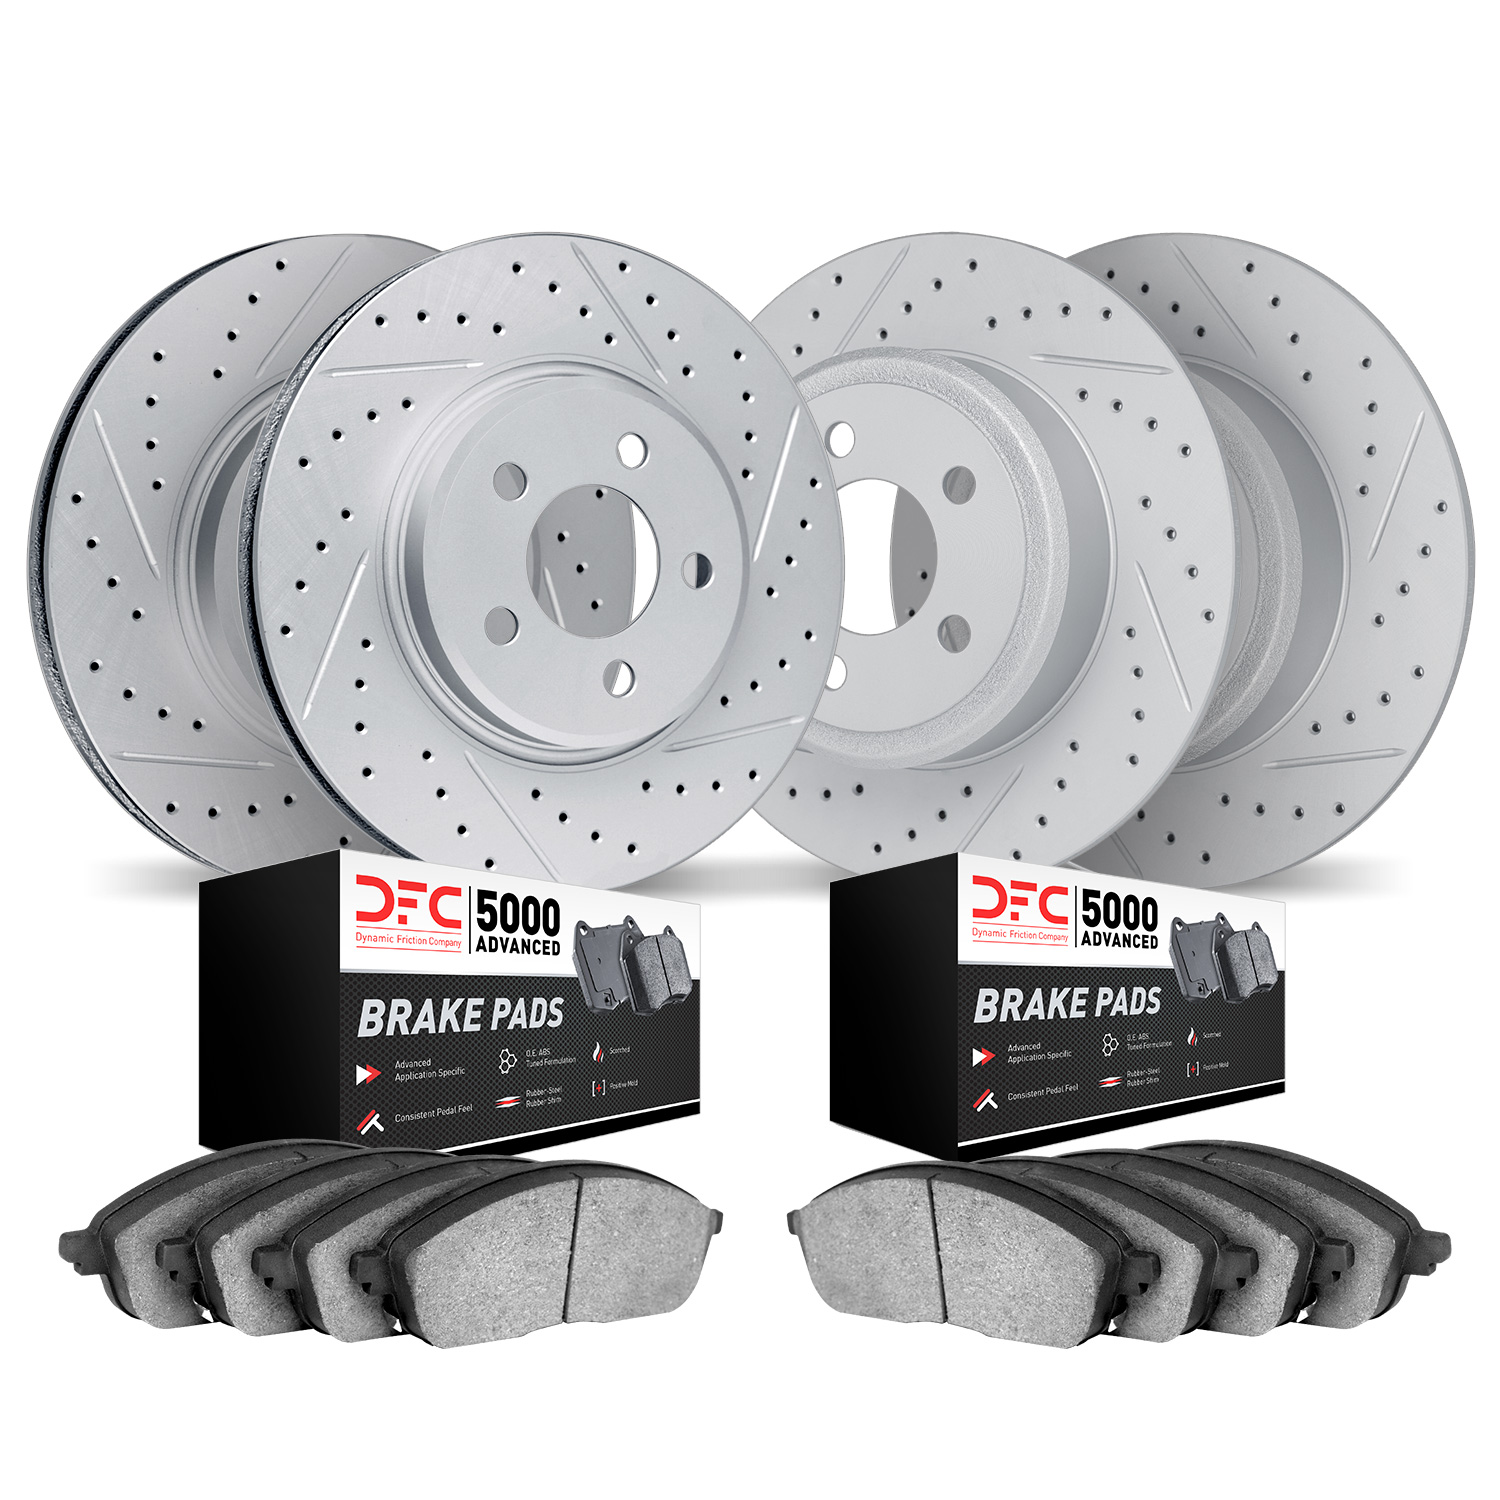 2504-27006 Geoperformance Drilled/Slotted Rotors w/5000 Advanced Brake Pads Kit, 2004-2013 Volvo, Position: Front and Rear